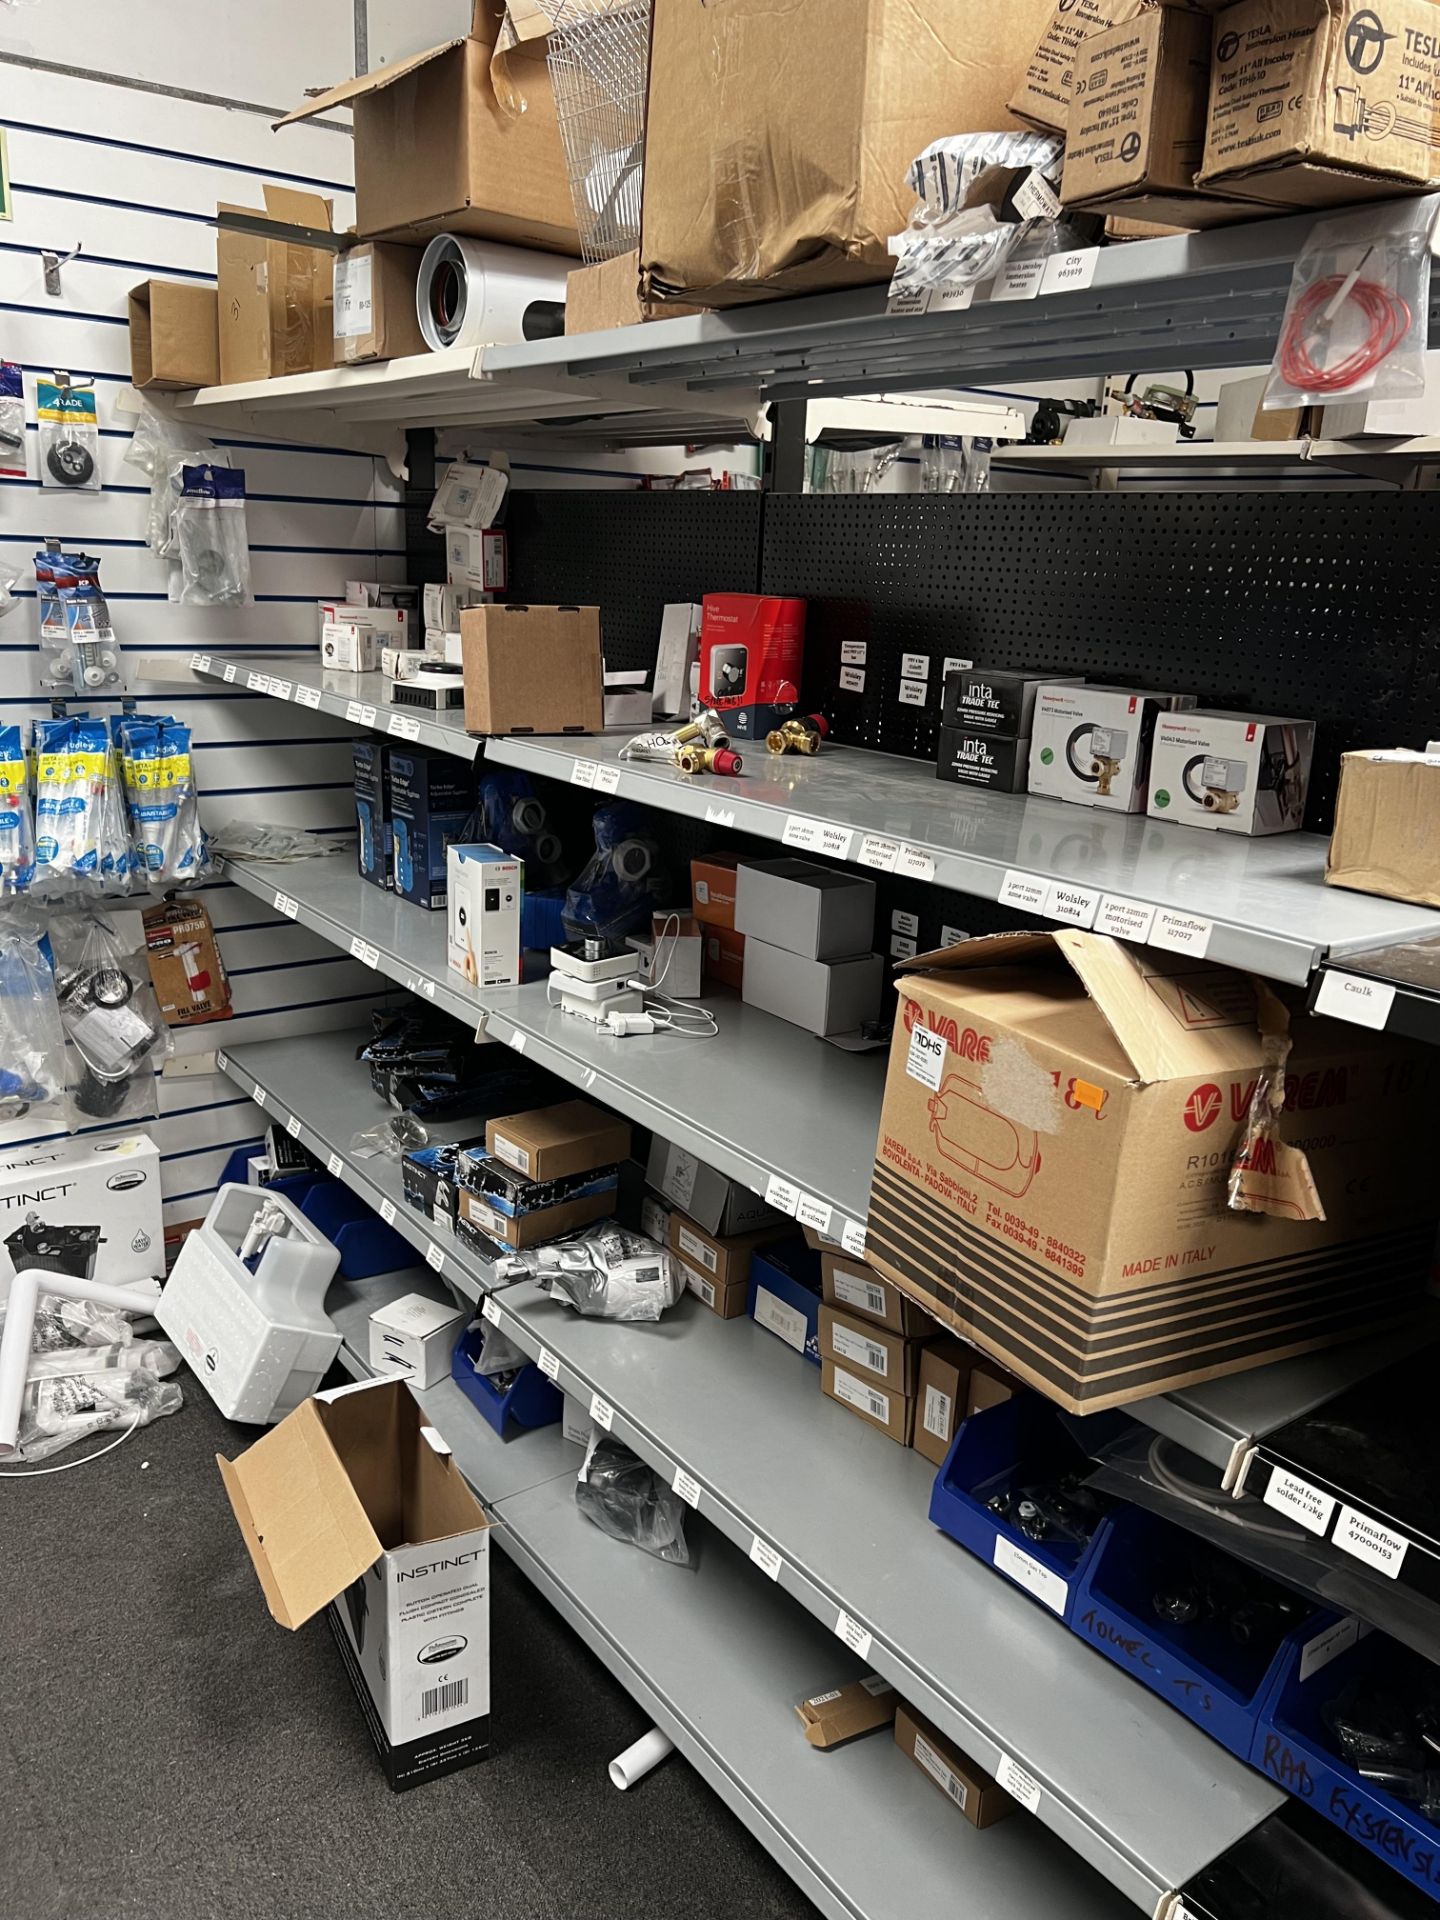 All Plumbing & Heating Stock including all racking and storage shelves/bins as shown in photos - Image 14 of 34